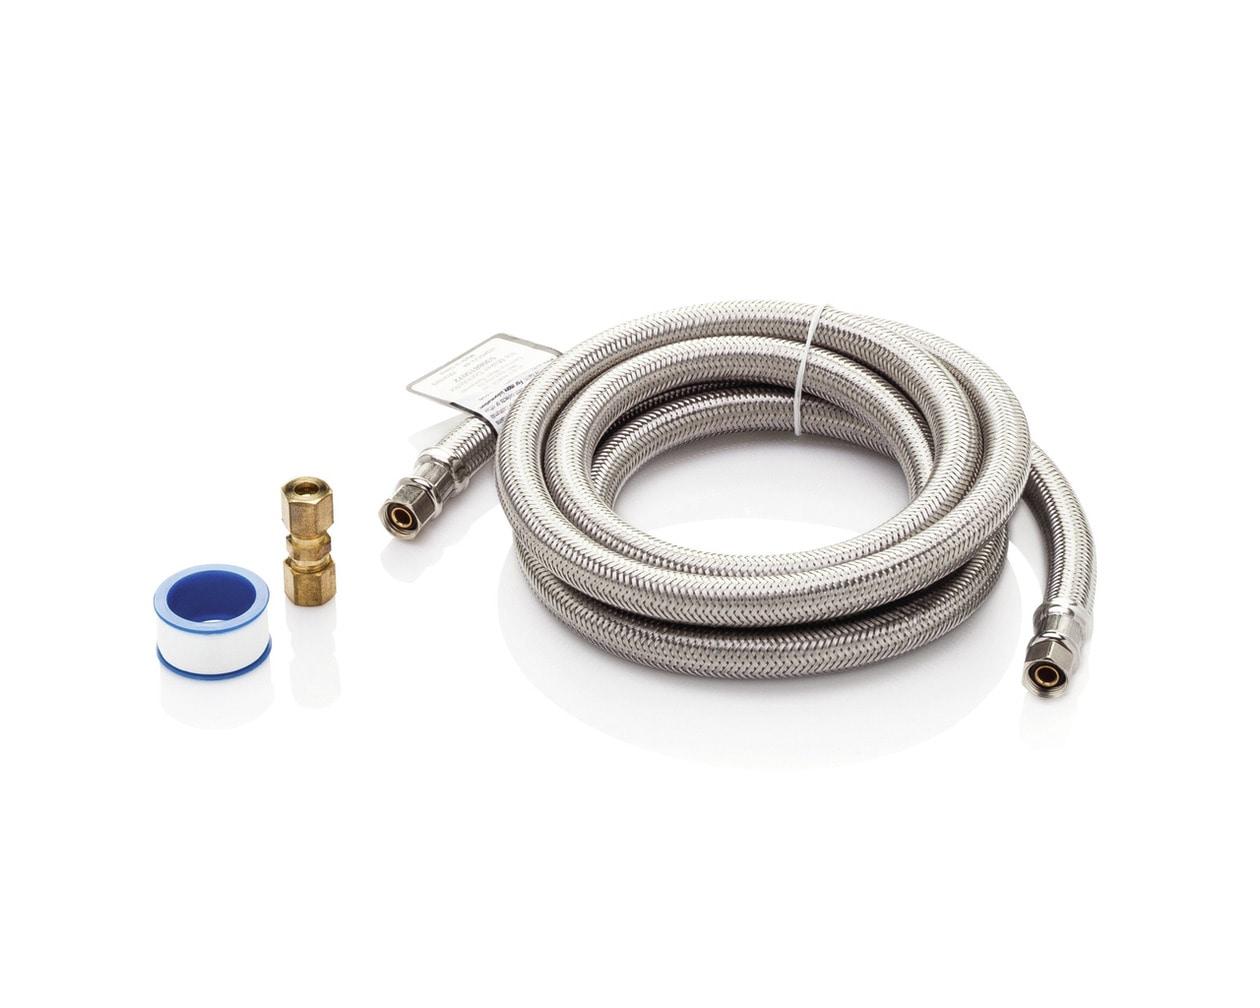 Frigidaire Smart Choice 6' Long Stainless Steel Braided Refrigerator Water Supply Line